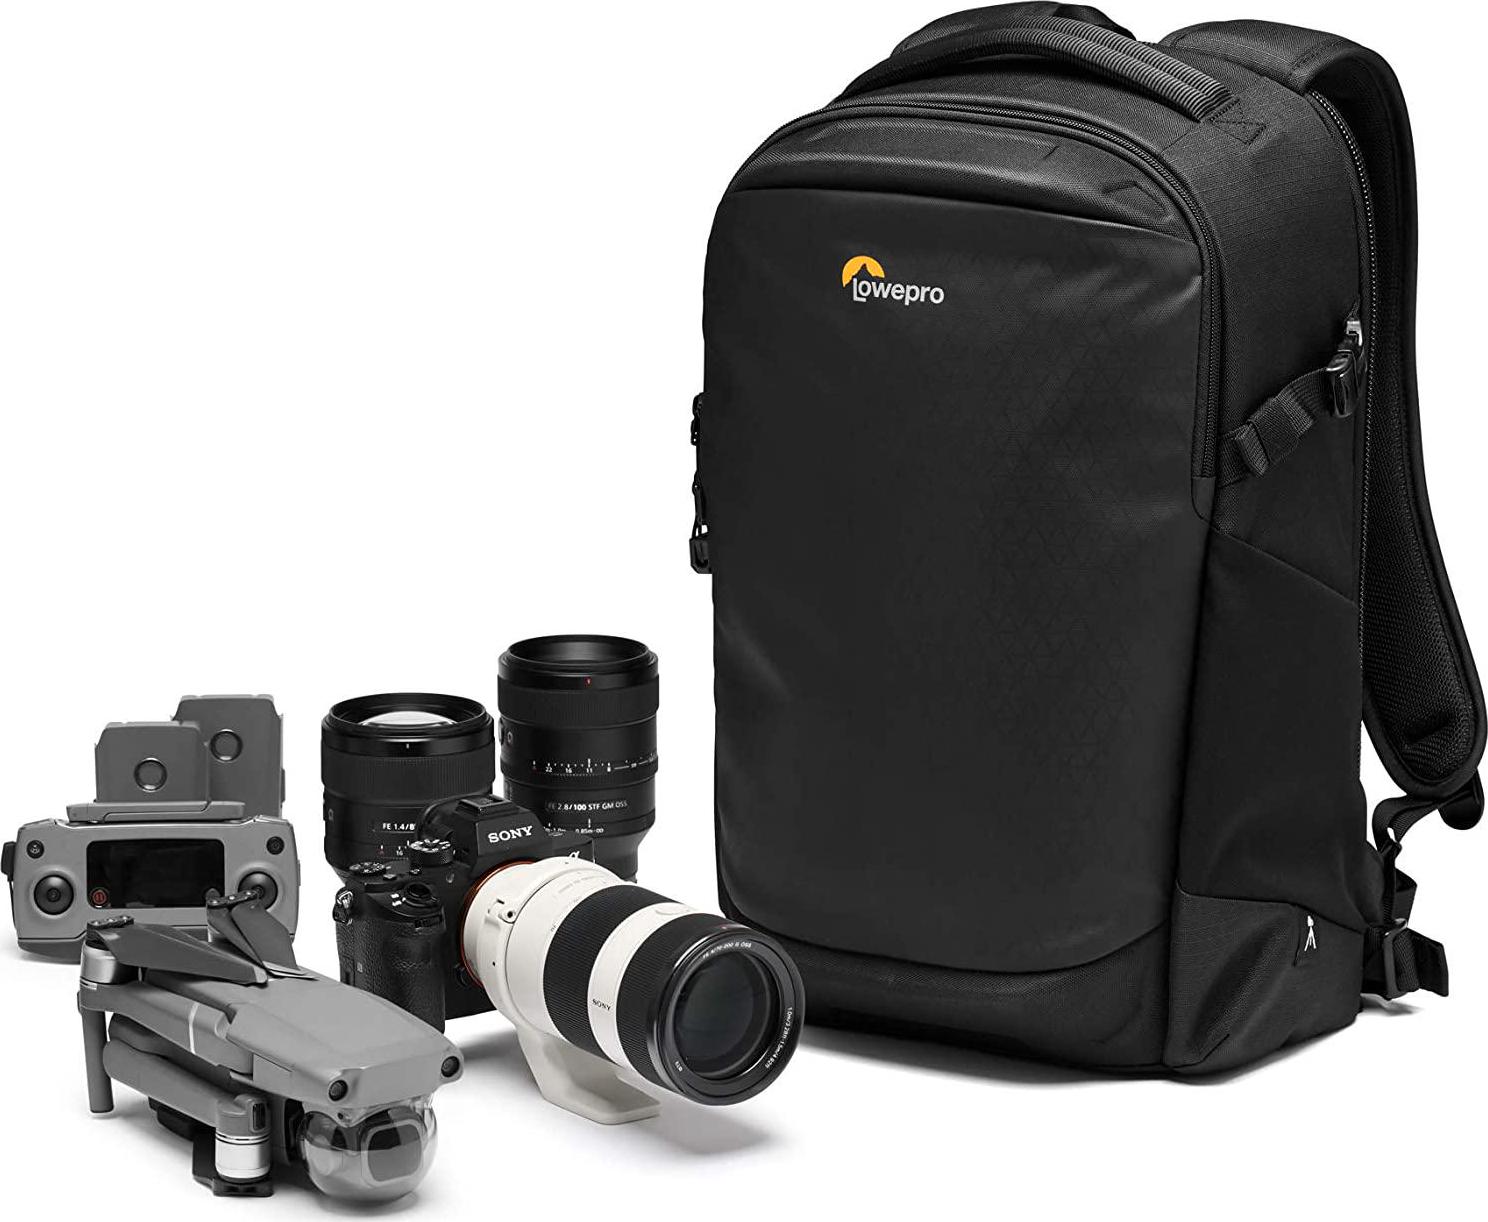 Lowepro, Lowepro Flipside BP 300 AW III Mirrorless and DSLR Camera Backpack - Black - with Rear Access - with Side Access - with Adjustable Dividers - for Mirrorless Cameras